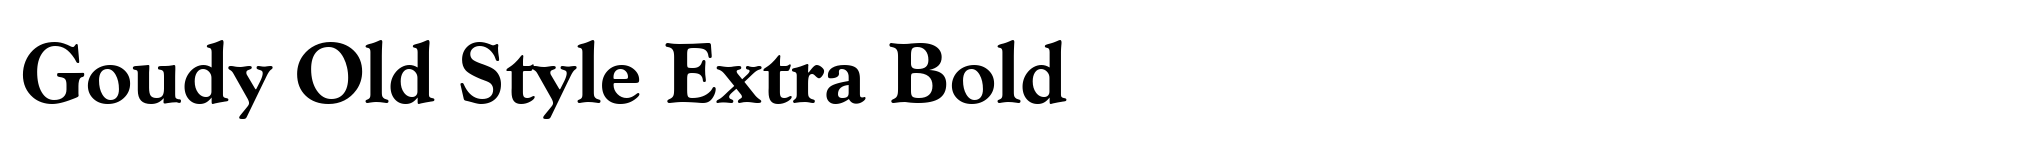 Goudy Old Style Extra Bold image